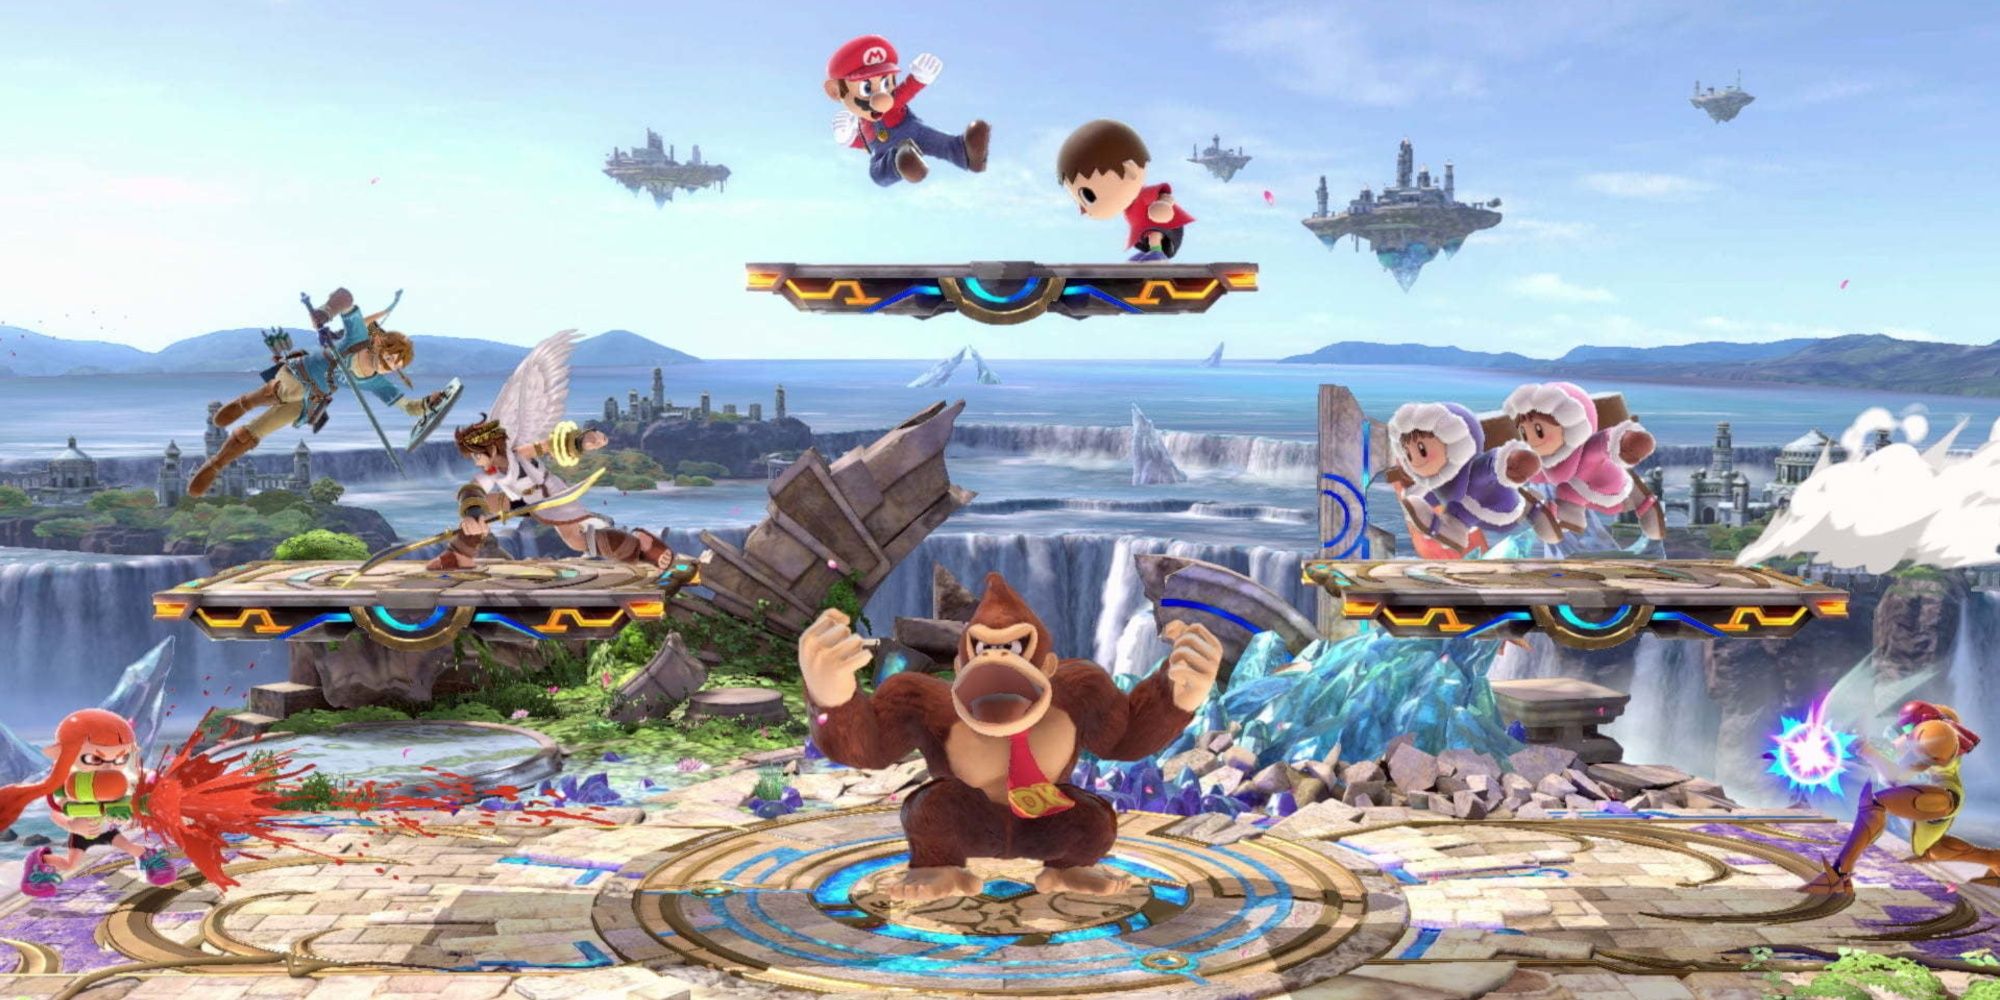 inkling donkey kong mario ness ice climbers samus and link battling in smash ultimate